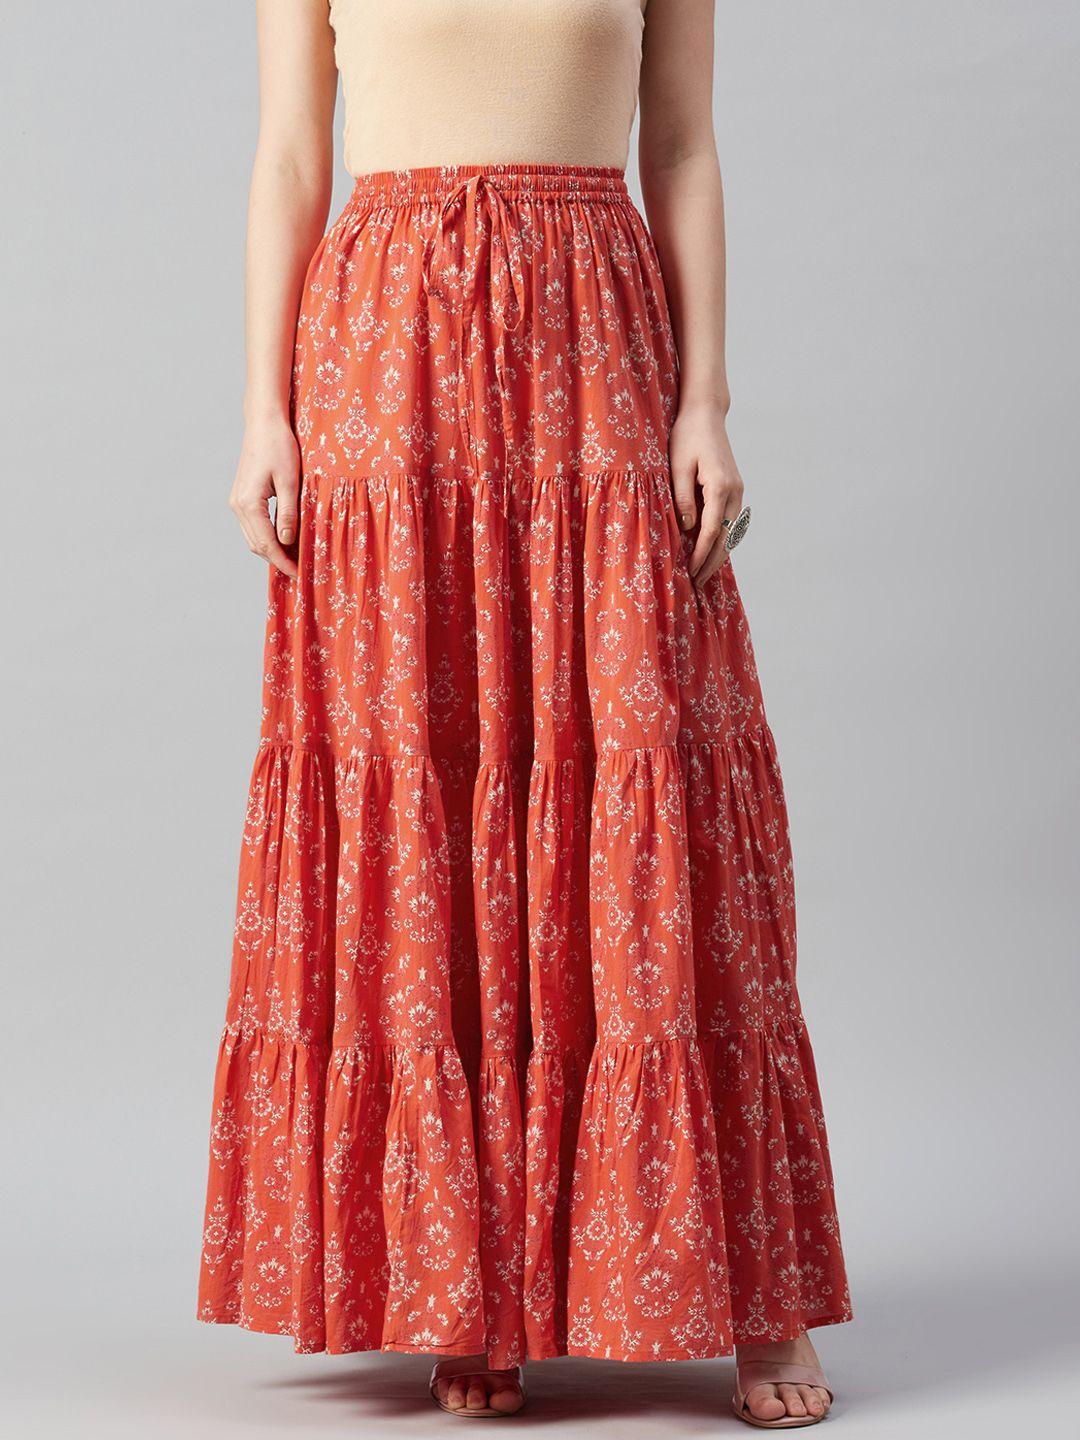 anayna women orange & off-white floral print flared tiered maxi pure cotton skirt